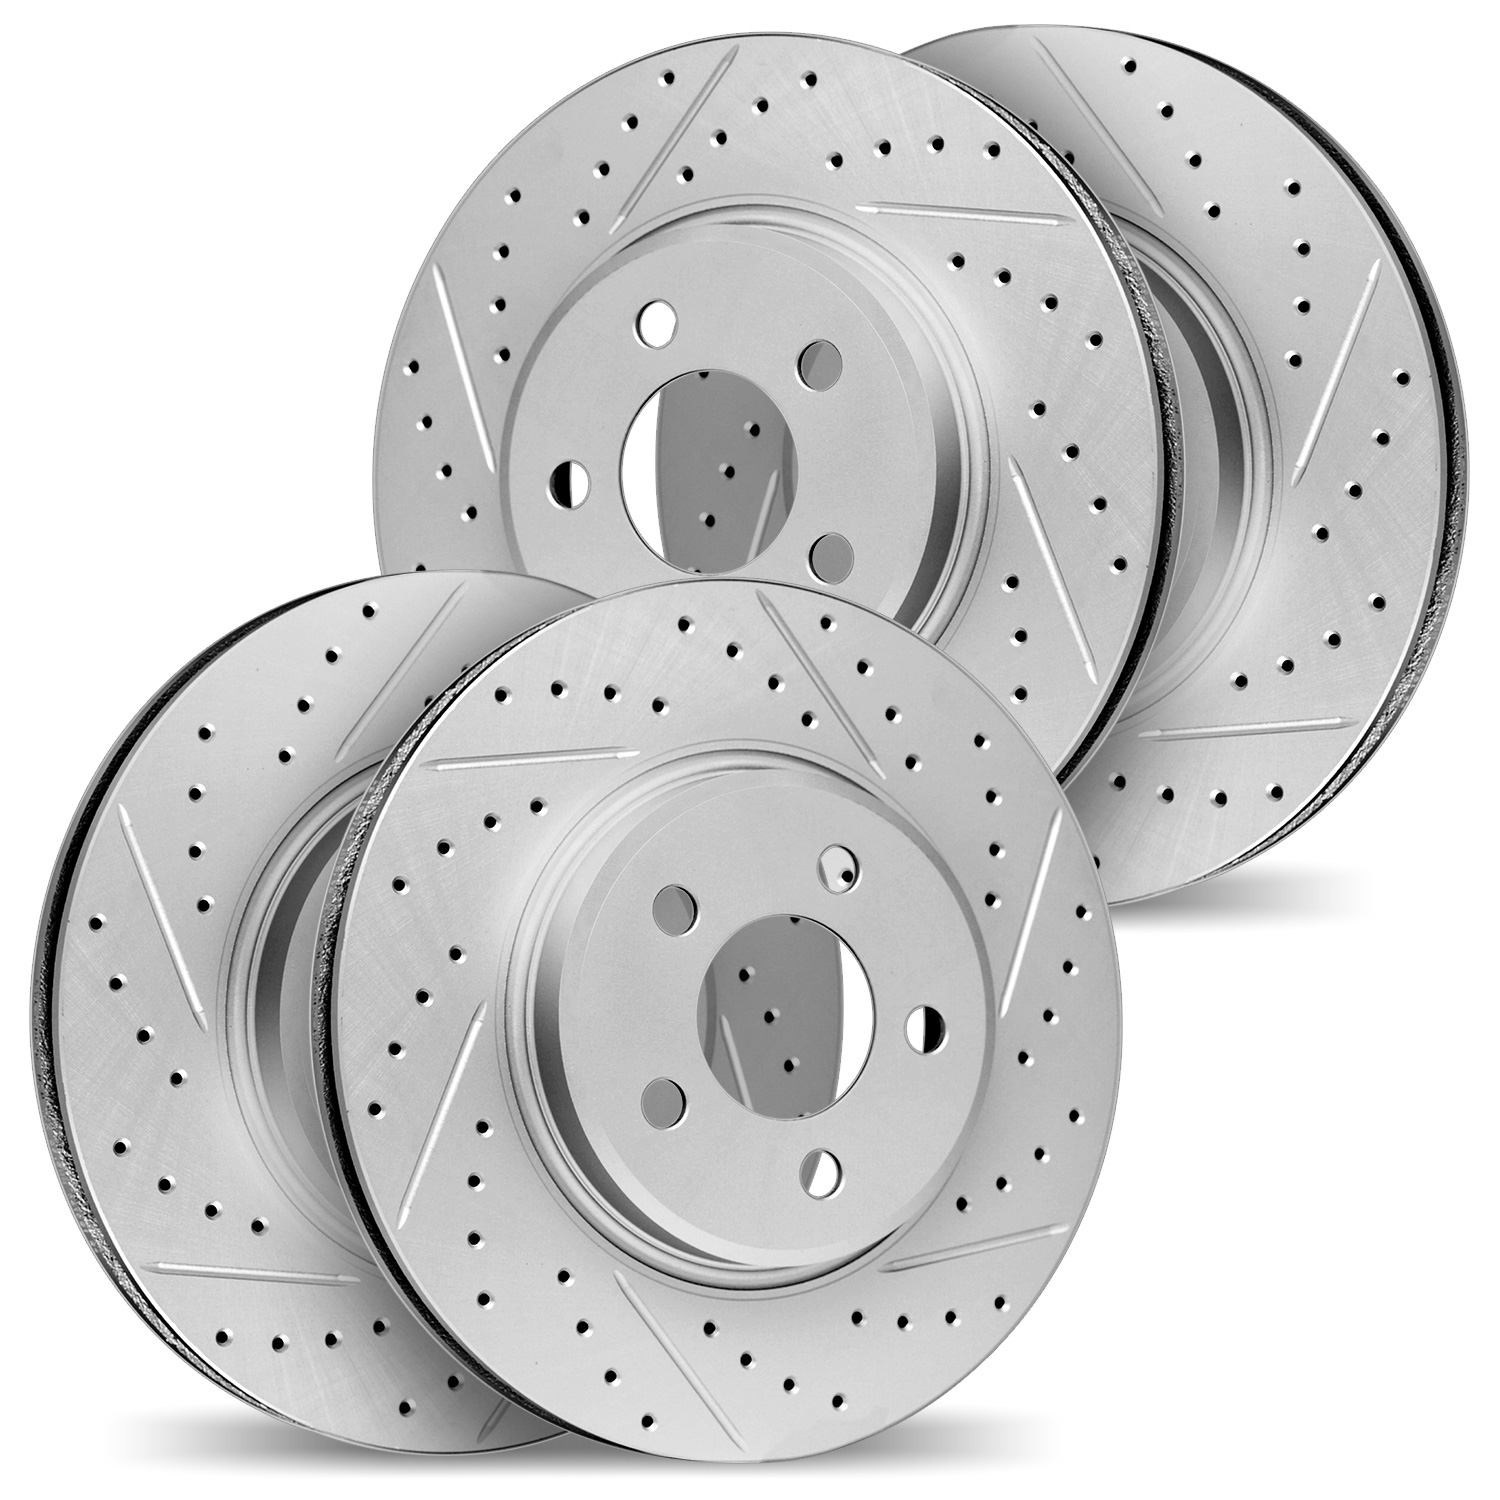 2004-27019 Geoperformance Drilled/Slotted Brake Rotors, 2007-2015 Volvo, Position: Front and Rear